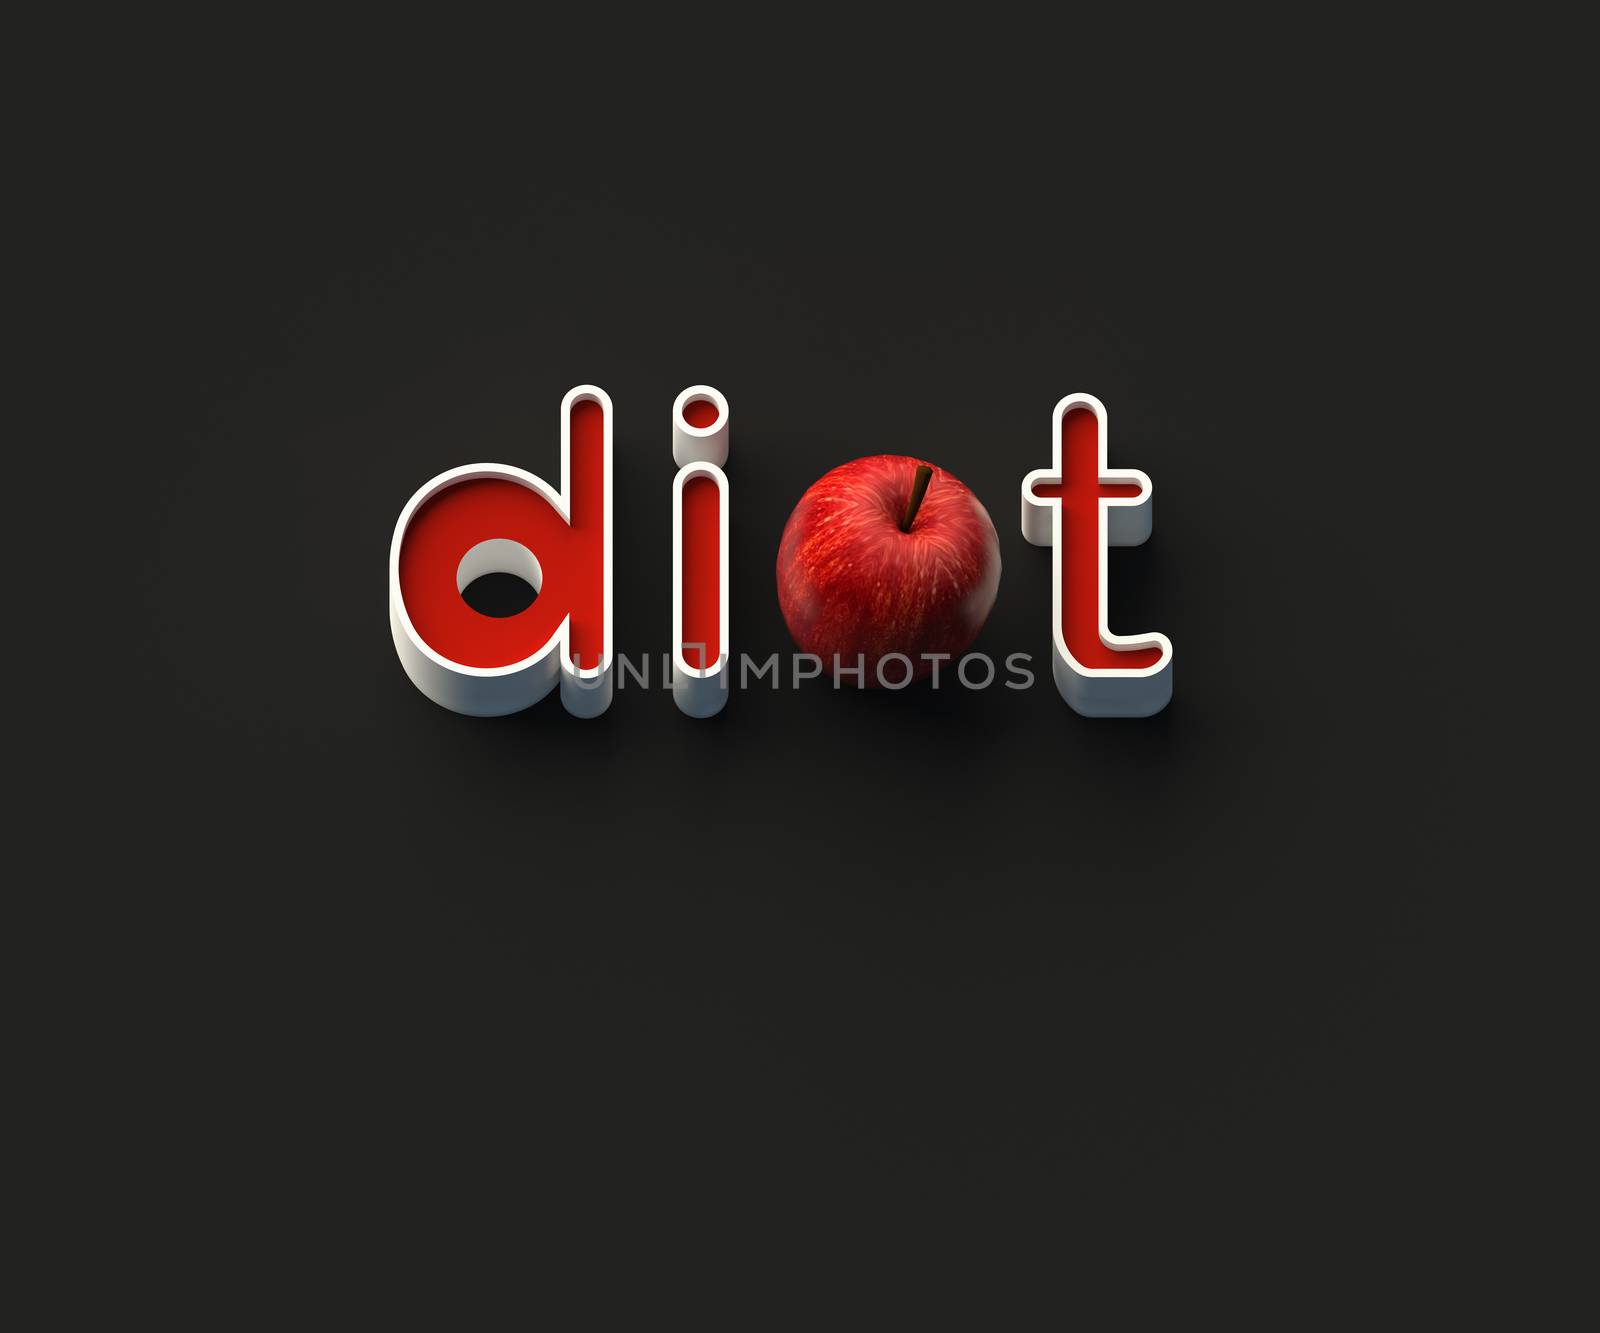 3D RENDERING OF WORDS 'di', AN APPLE AND 't' ON BLACK PLAIN BACKGROUND